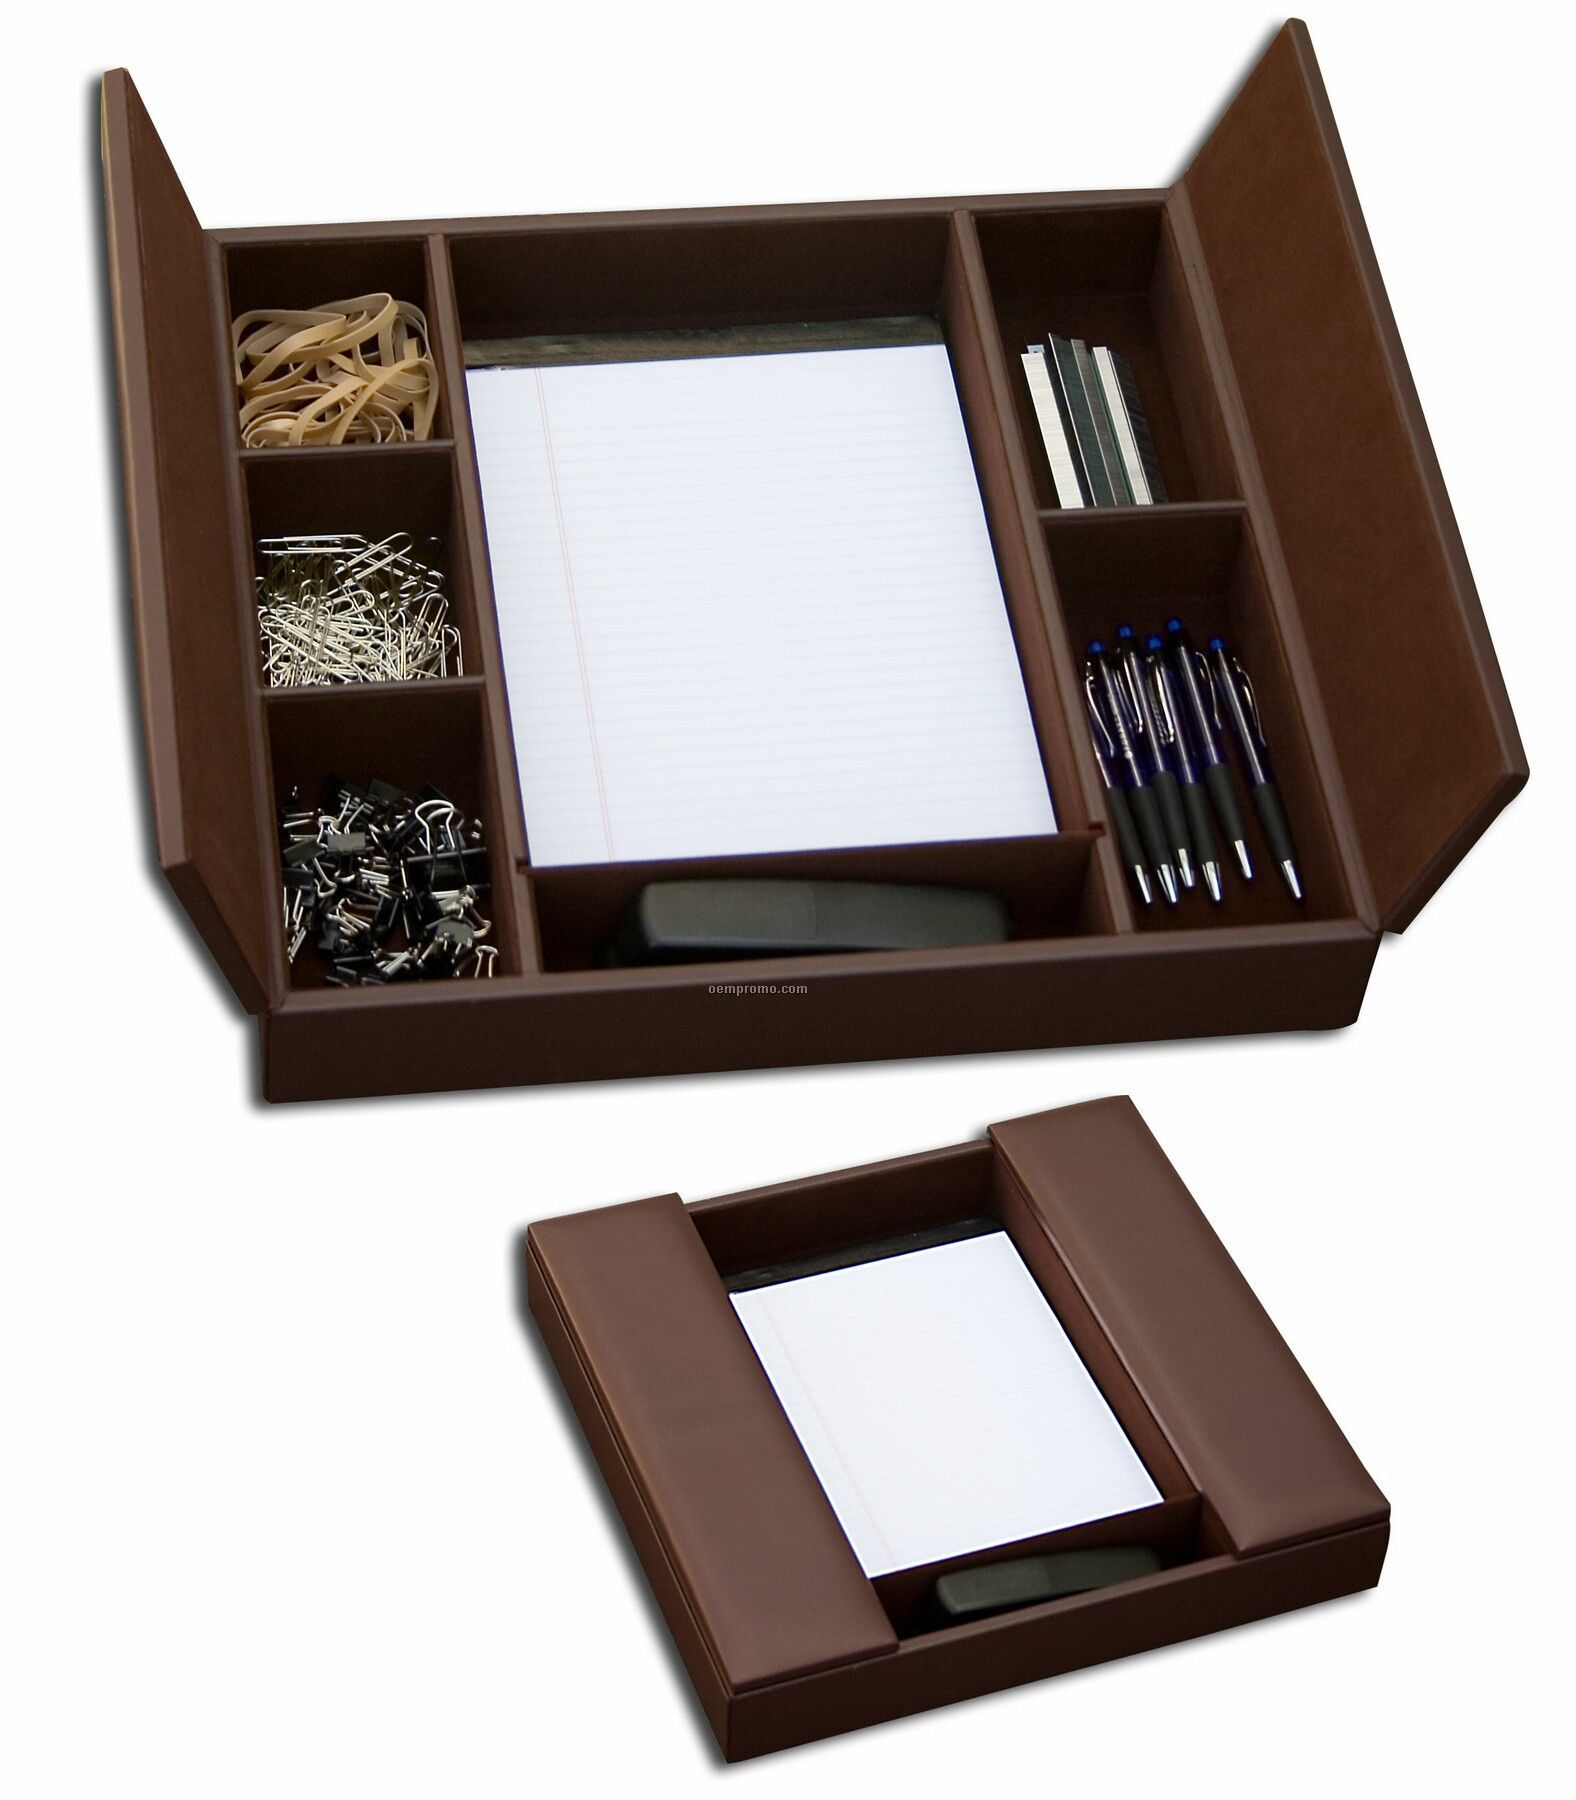 Classic Leather Enhanced Conference Room Organizer - Rustic Brown